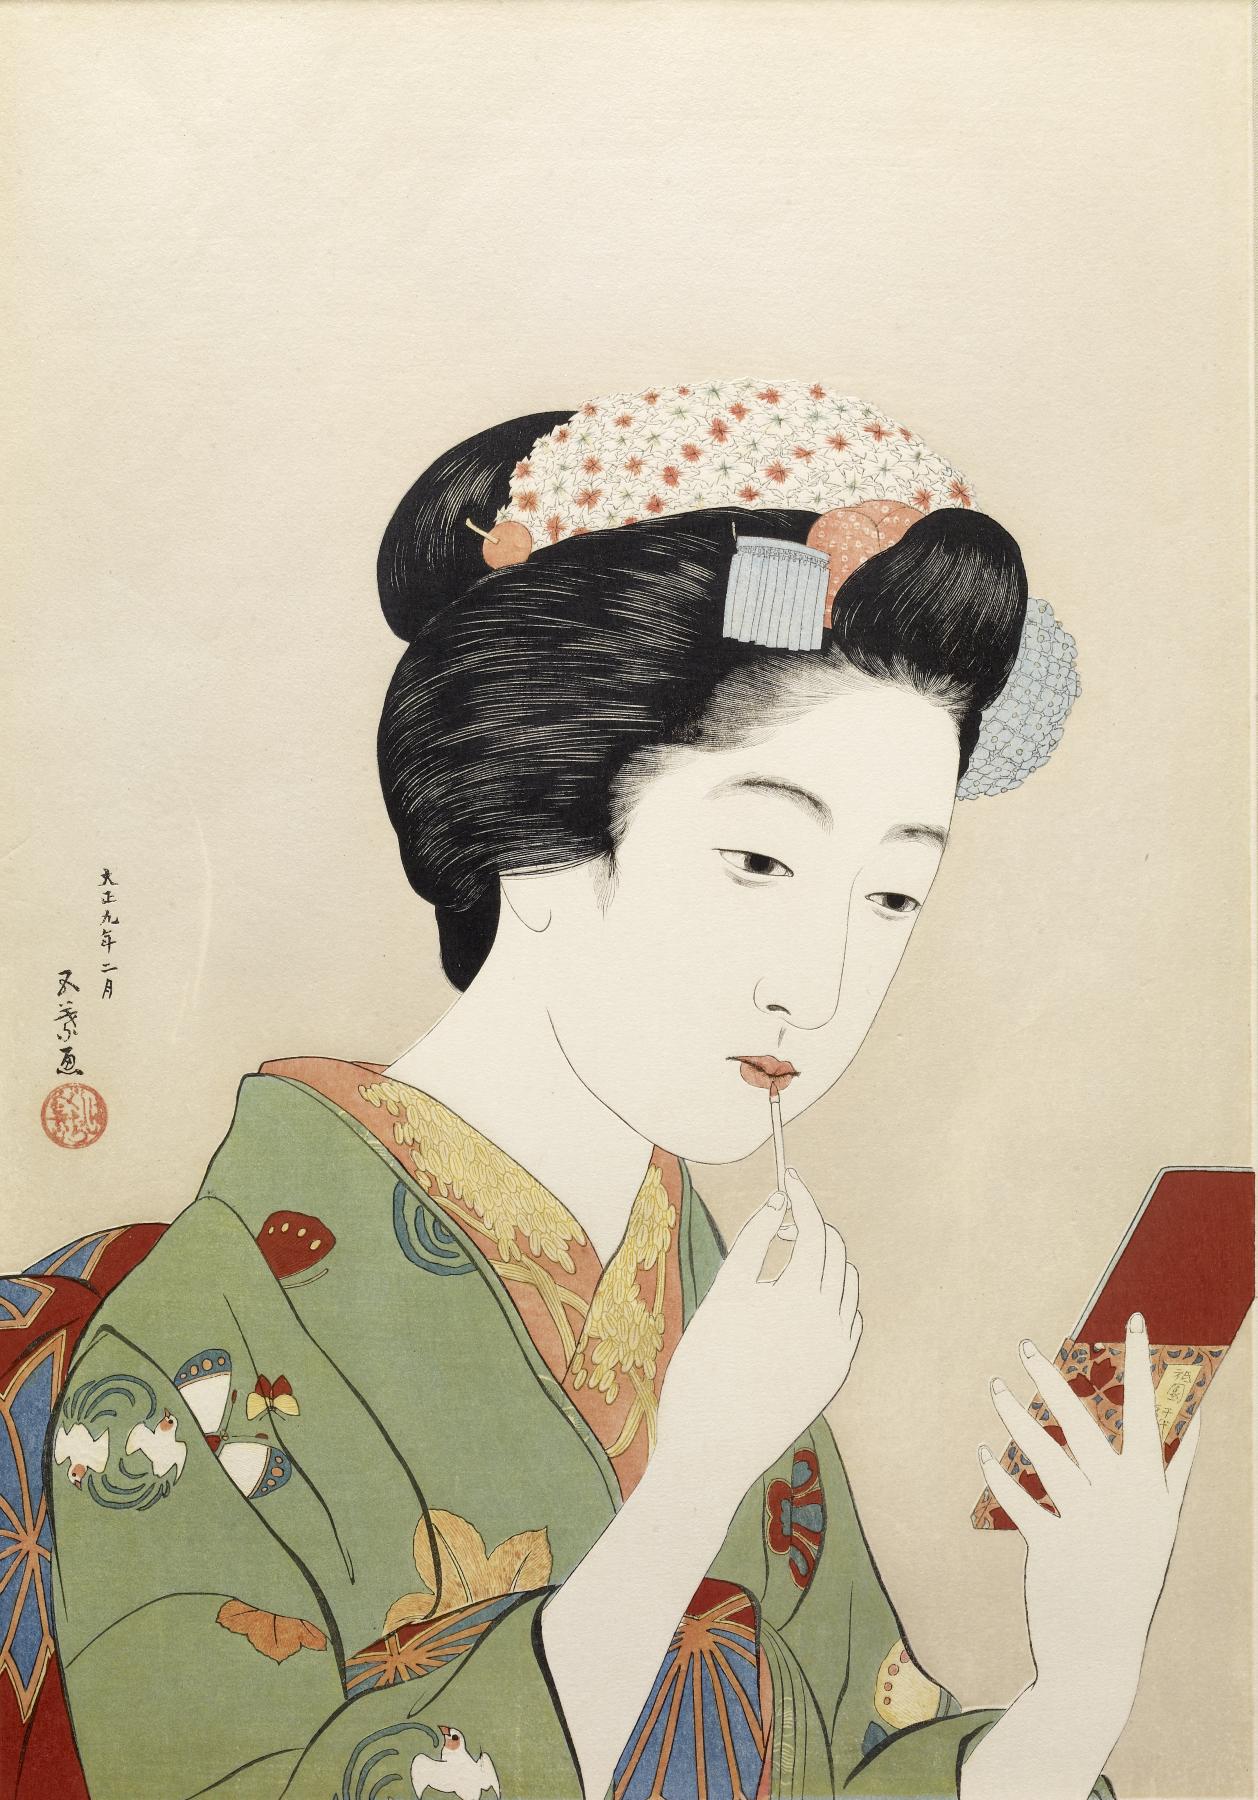 Image for 紅筆持てる女 (Woman Applying Color to Her Lips)